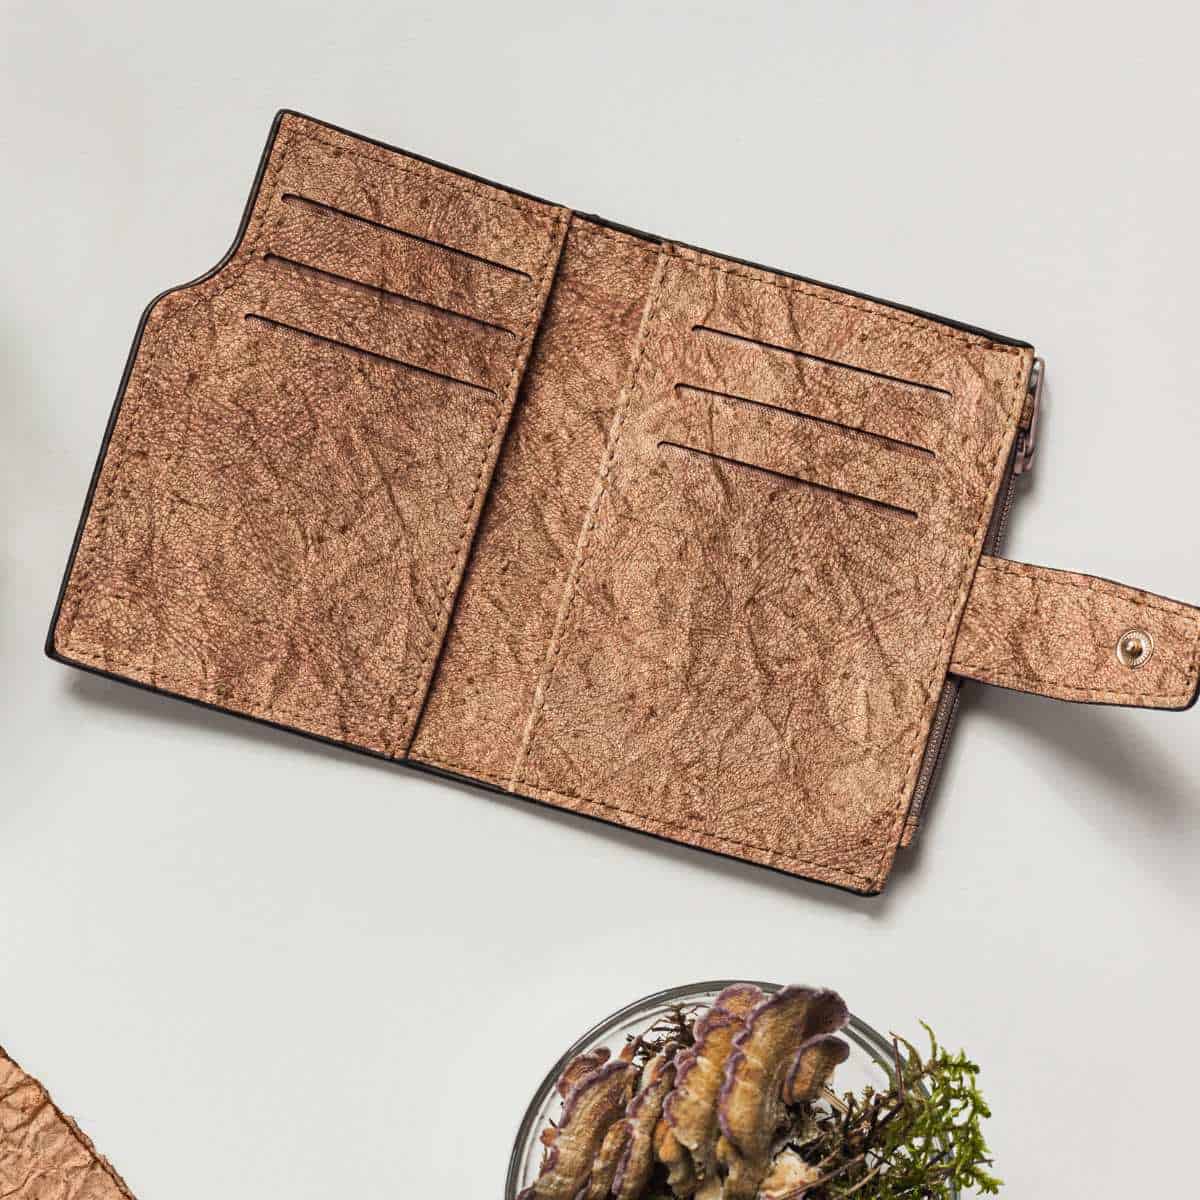 Vegan Wallets: Because Even Your Money Deserves a Compassionate Home